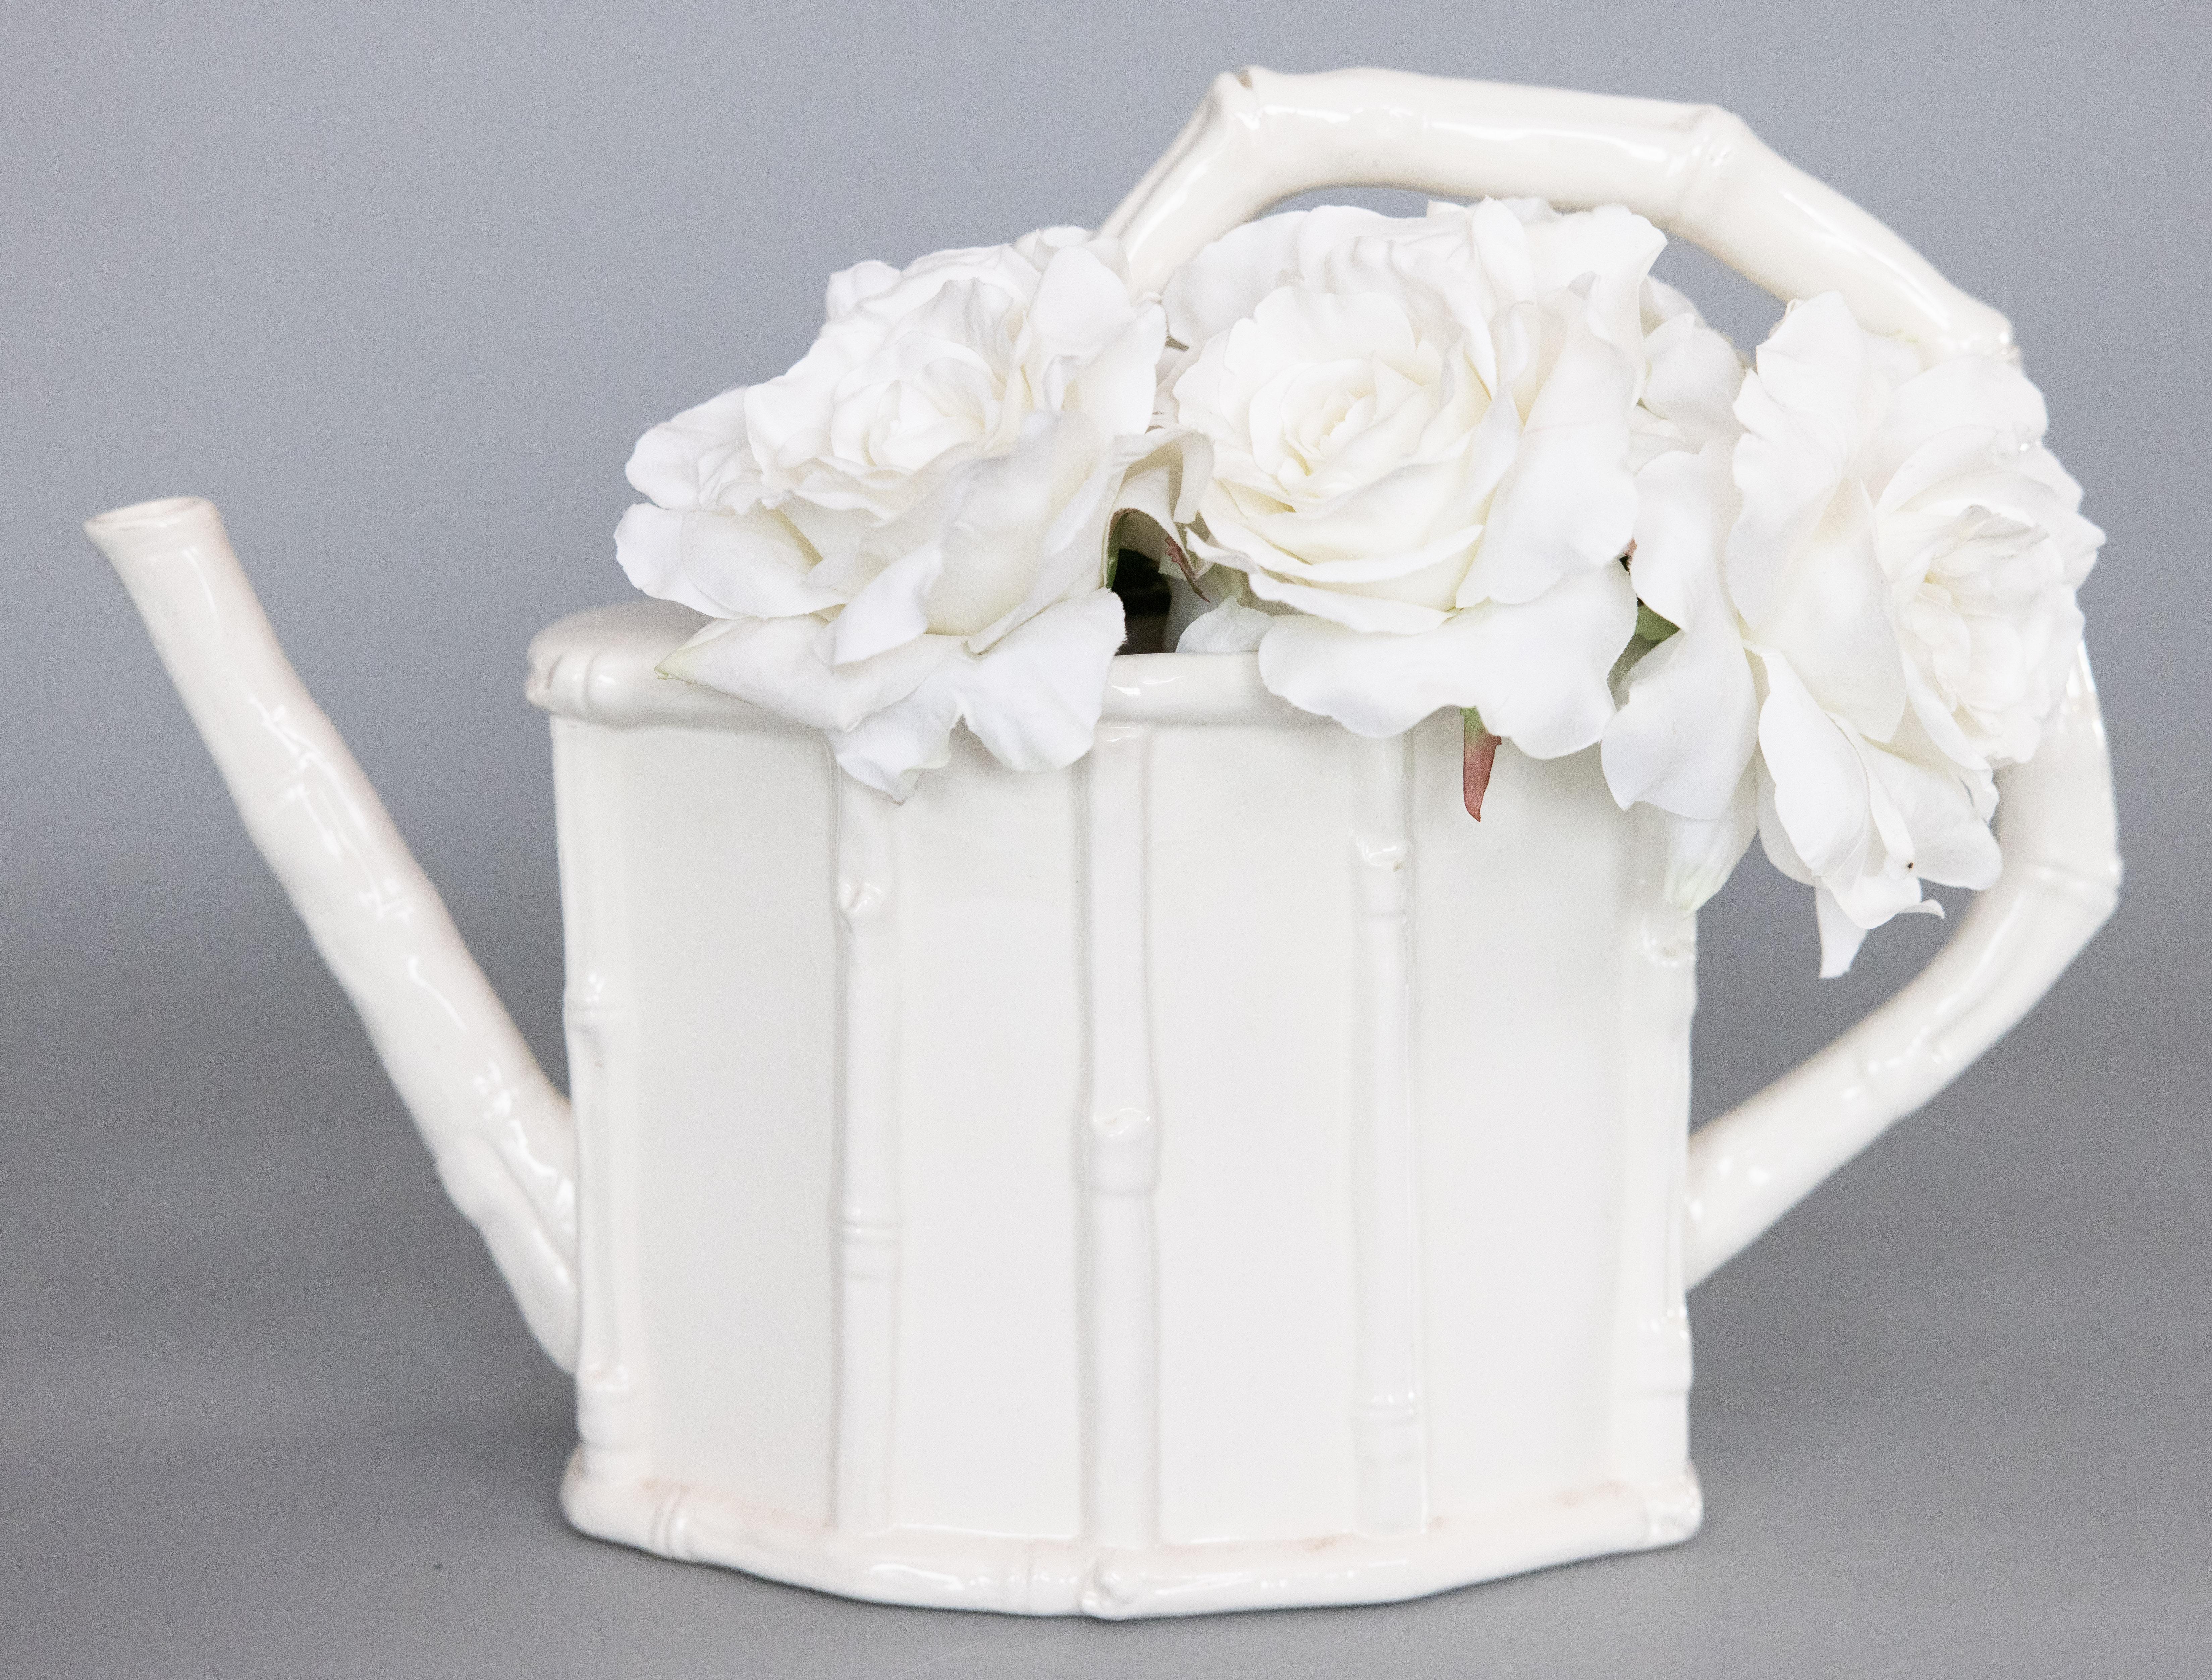 A fabulous vintage French Chinoiserie style white ironstone watering can or pitcher with a faux bamboo design, circa 1950. It has a sleek and stylish design, perfect for the modern home, and it displays beautifully, lovely with your favorite